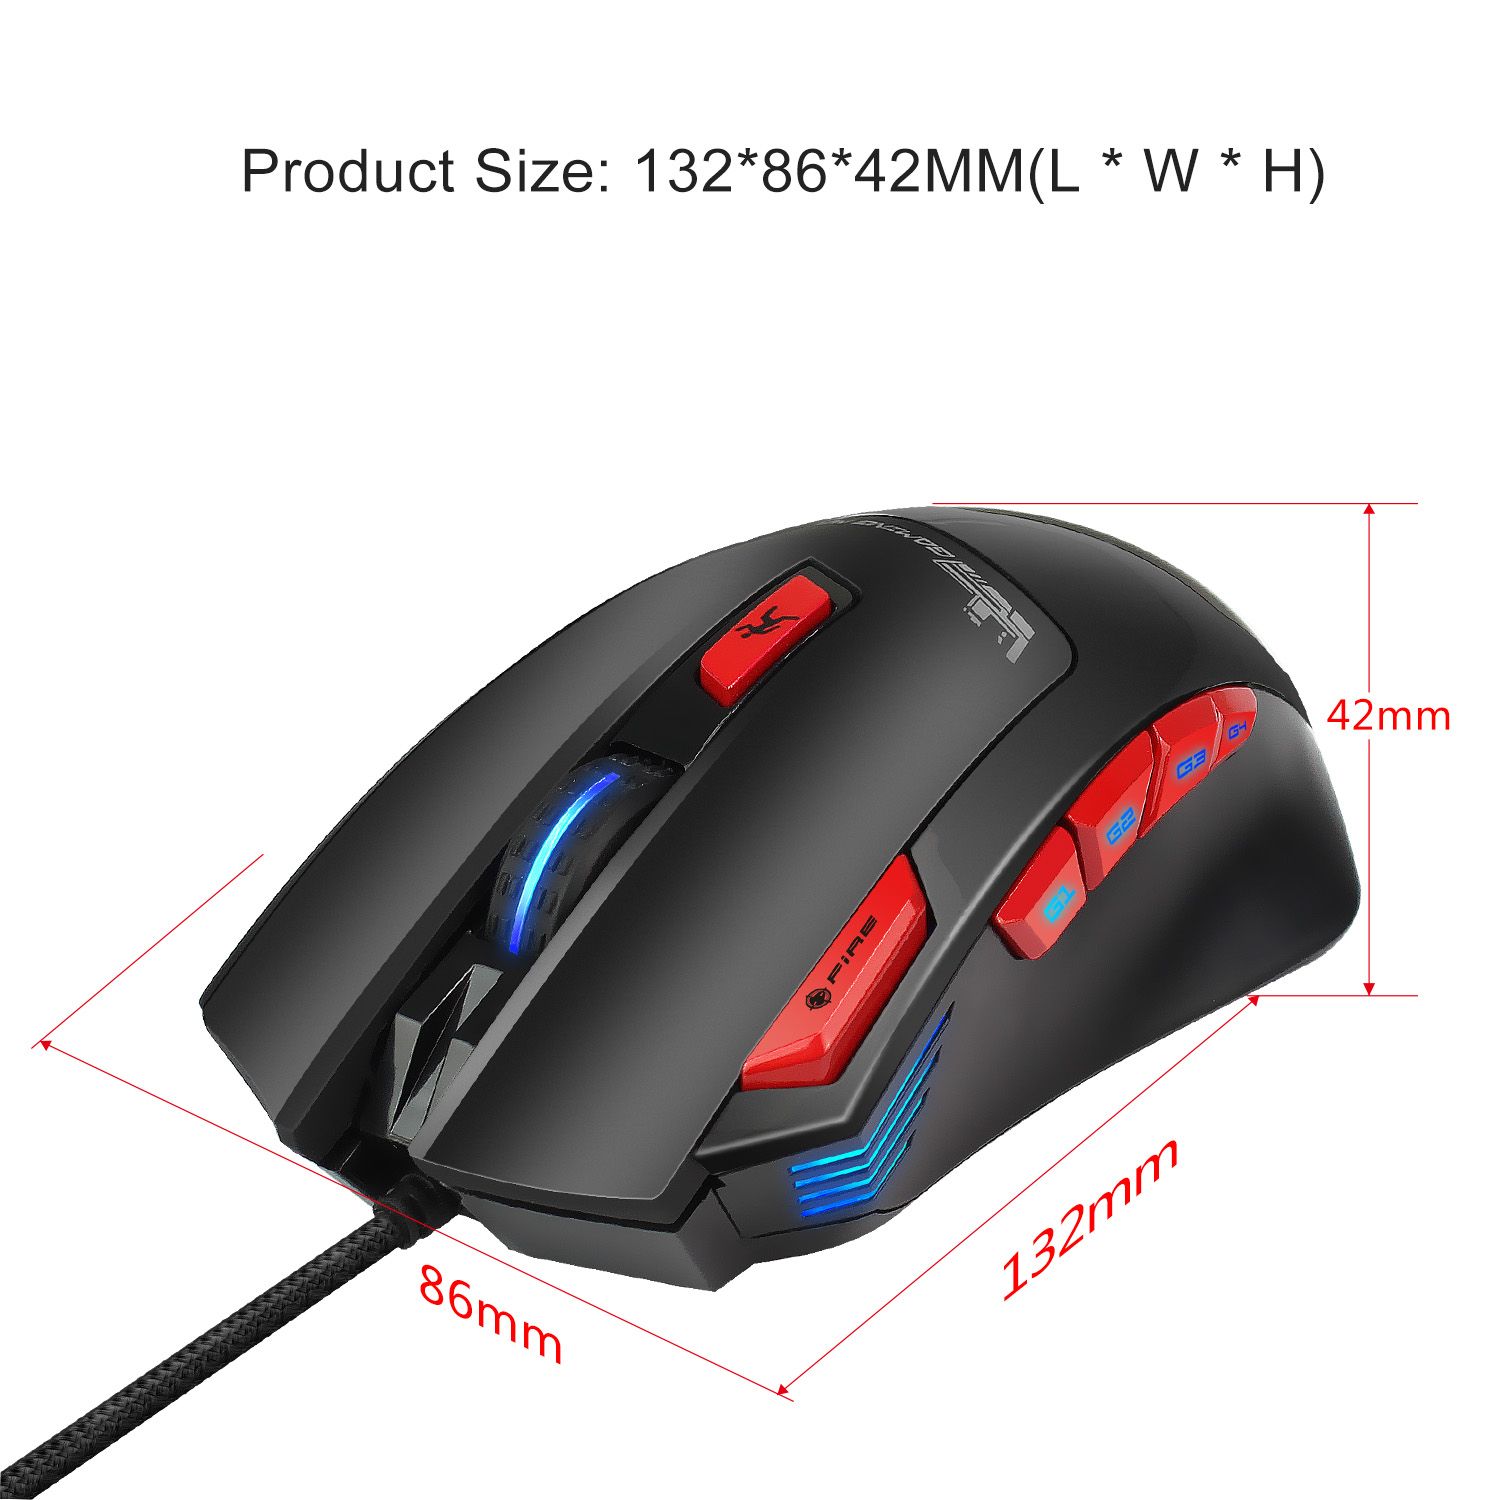 HXSJ-S800-9-Buttons-6000DPI-Backlit-Gaming-Mouse-USB-Wired-Optical-Programmable-Mouse-Mice-1258341